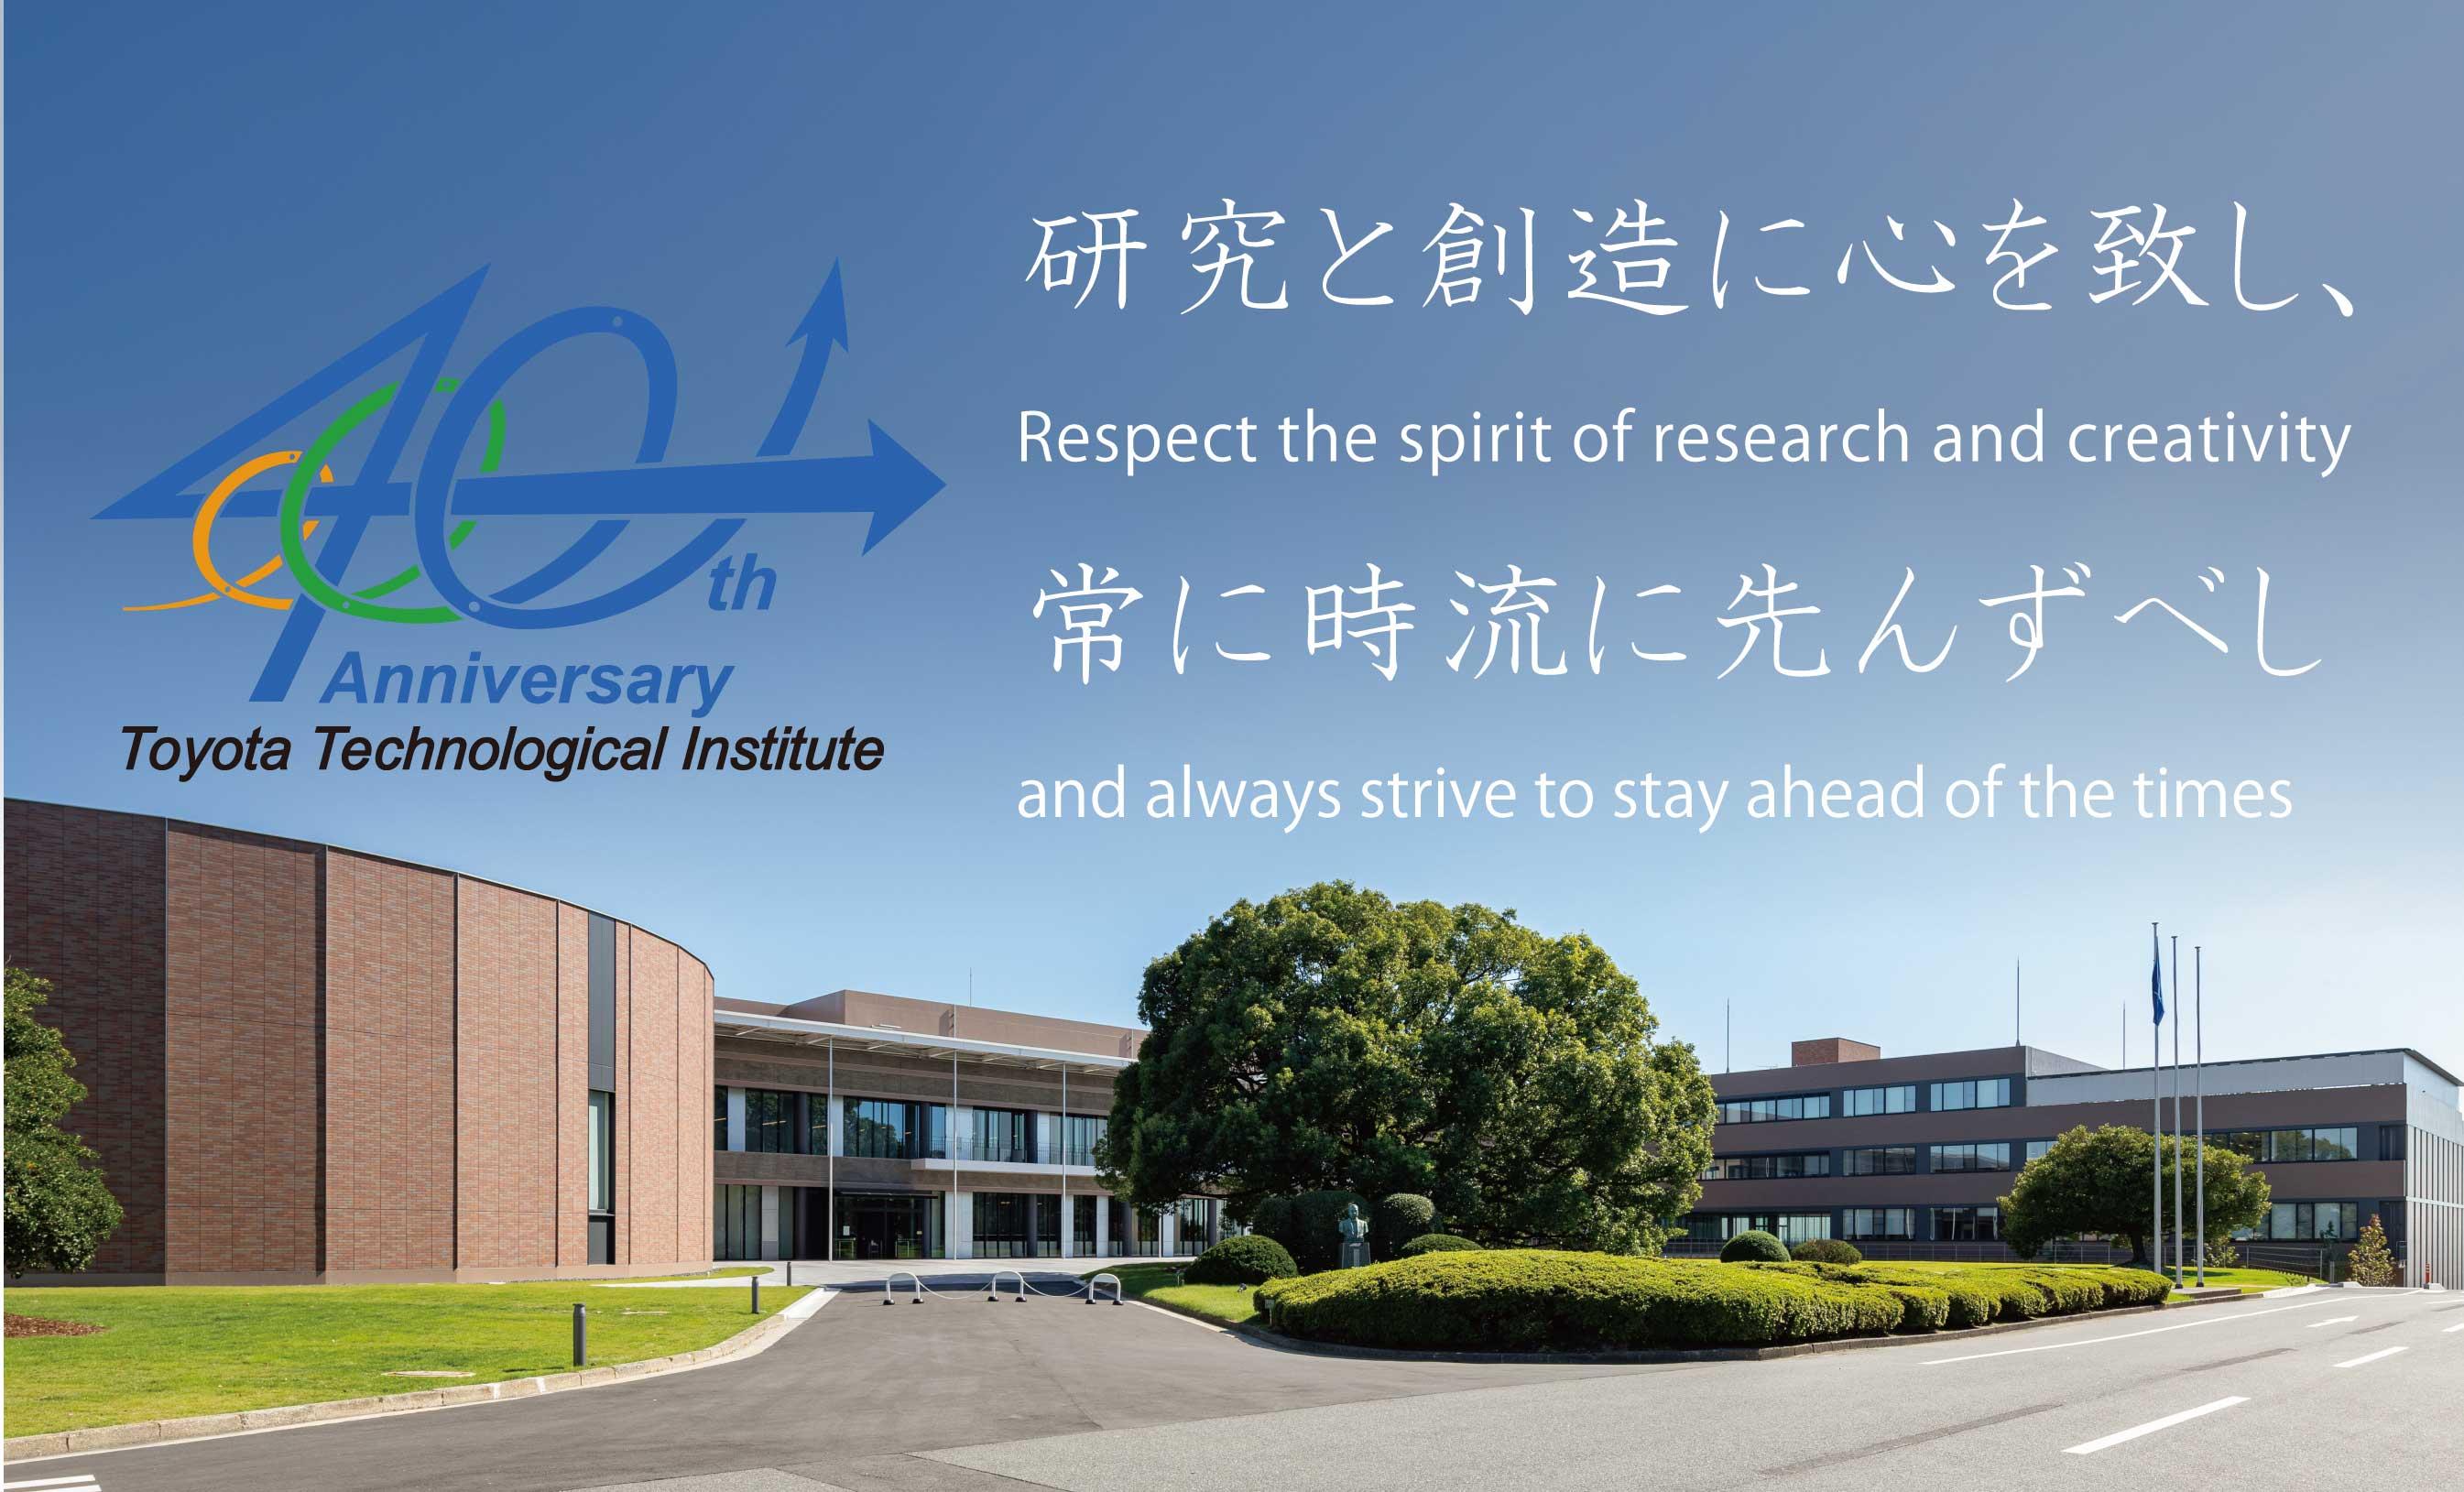 Toyota Technological Institute marked its 40th anniversary